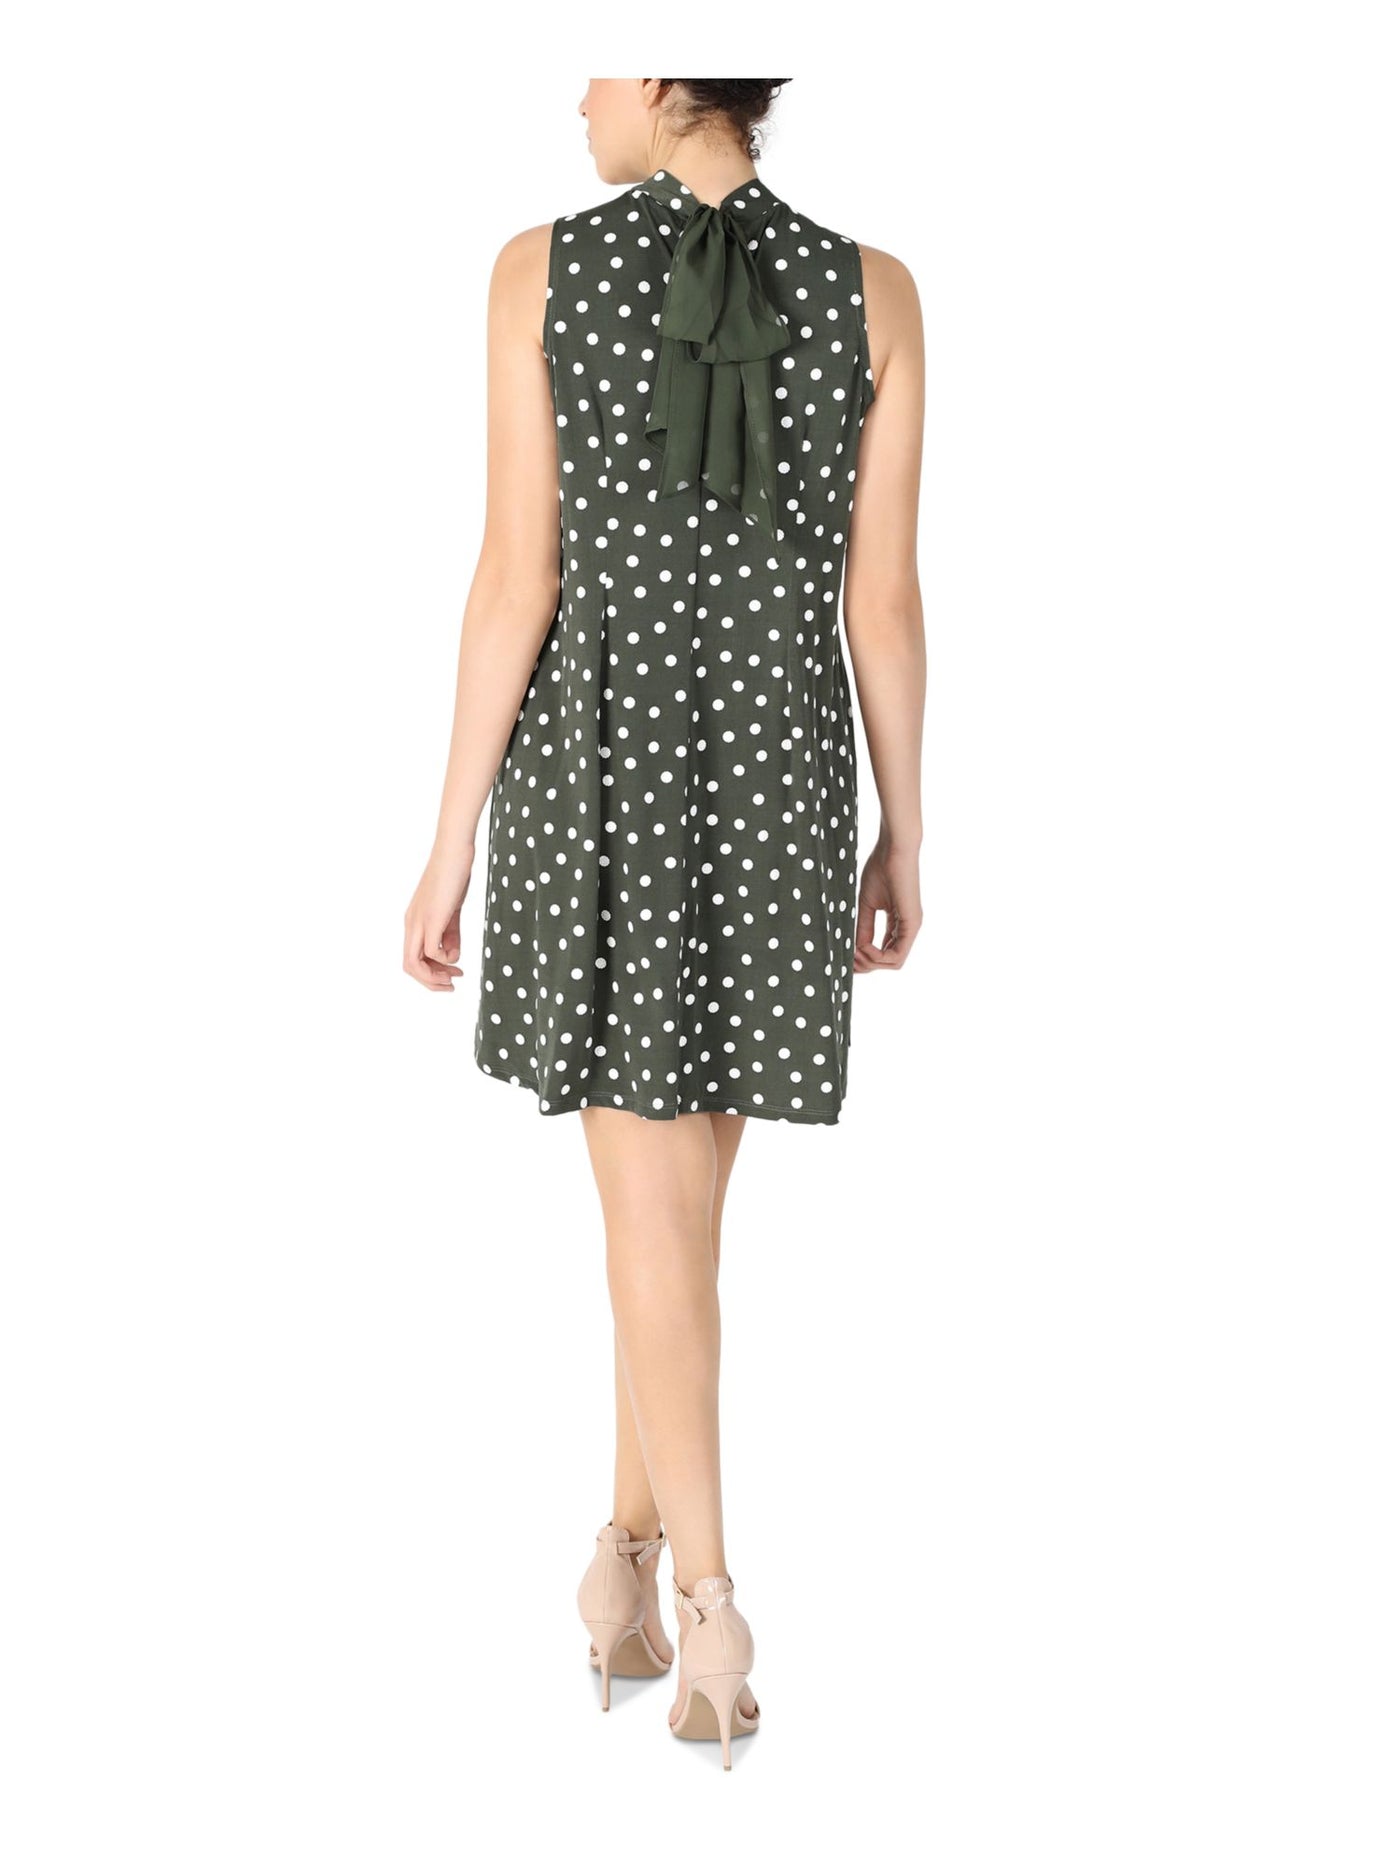 SIGNATURE BY ROBBIE BEE Womens Green Stretch Polka Dot Sleeveless Mock Neck Above The Knee Party Shift Dress Petites PS